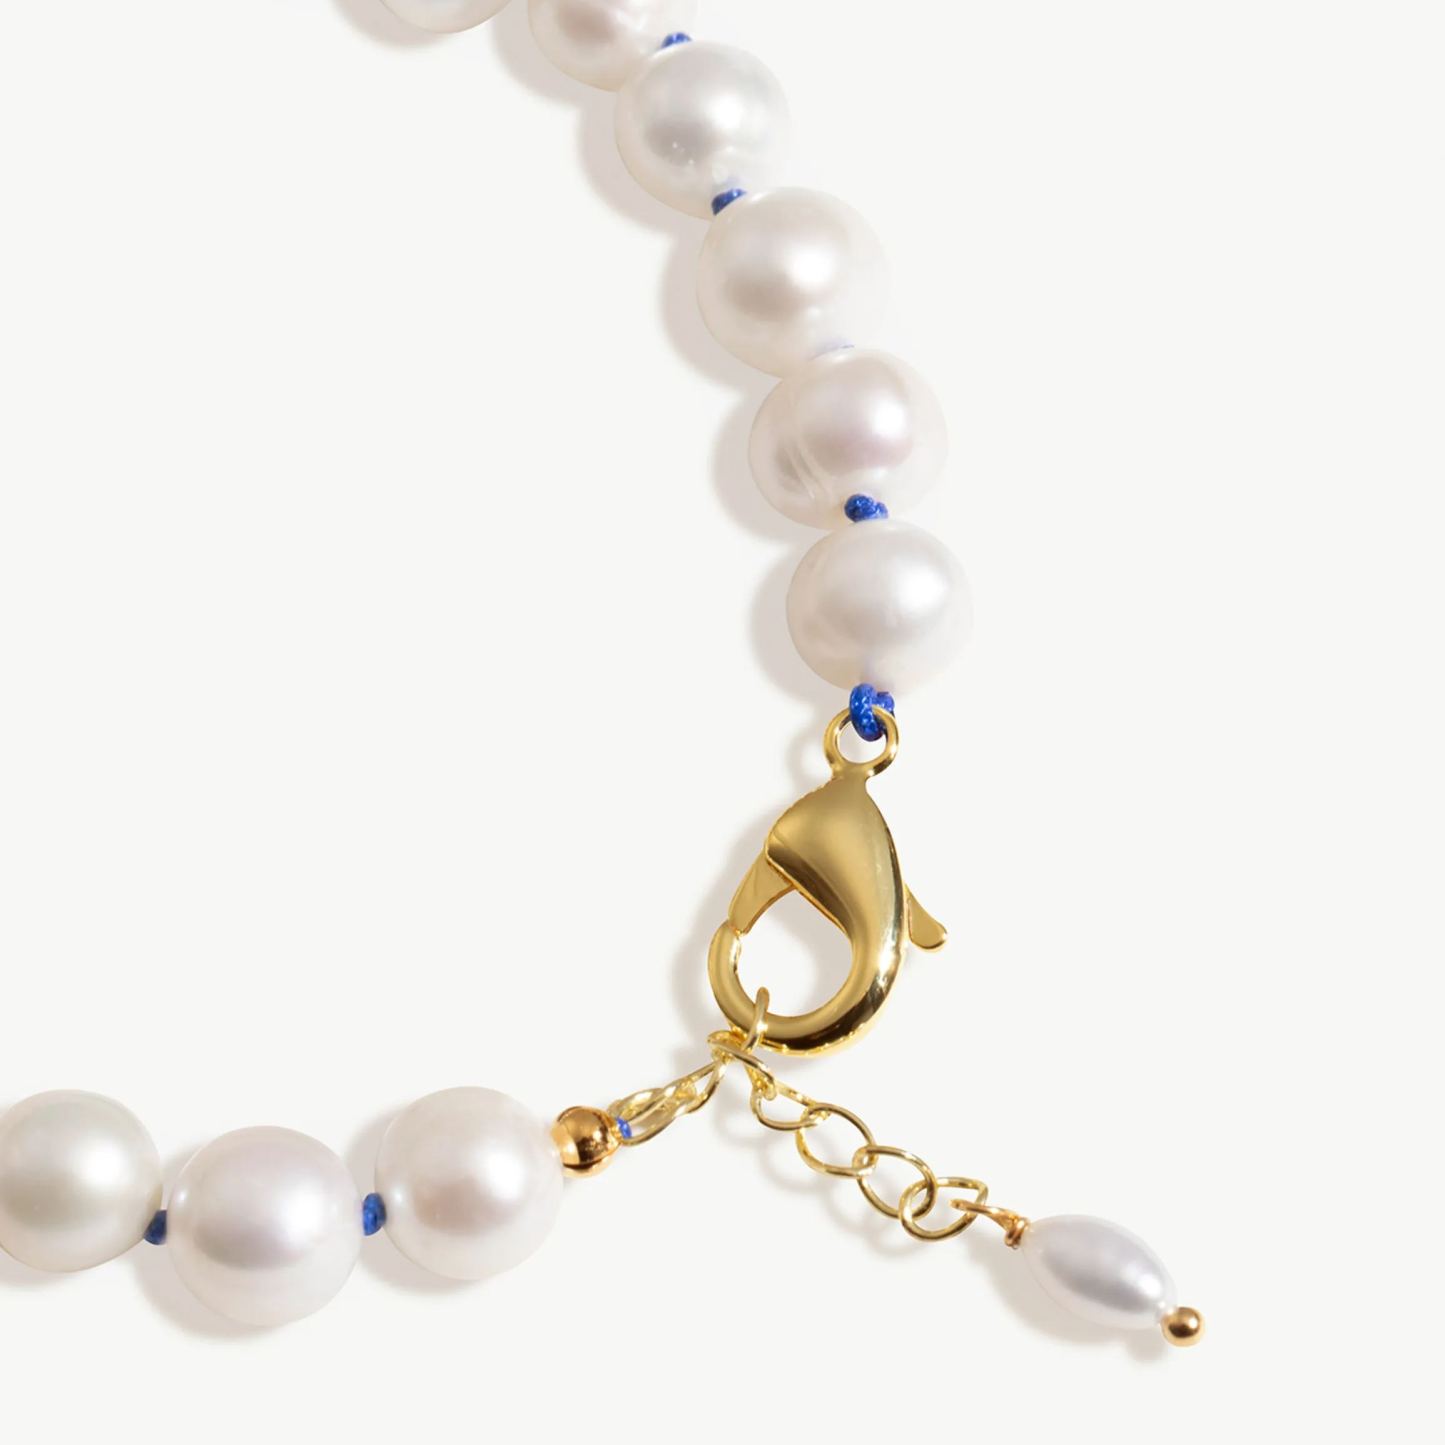 Blue Knotted Pearl Bracelet